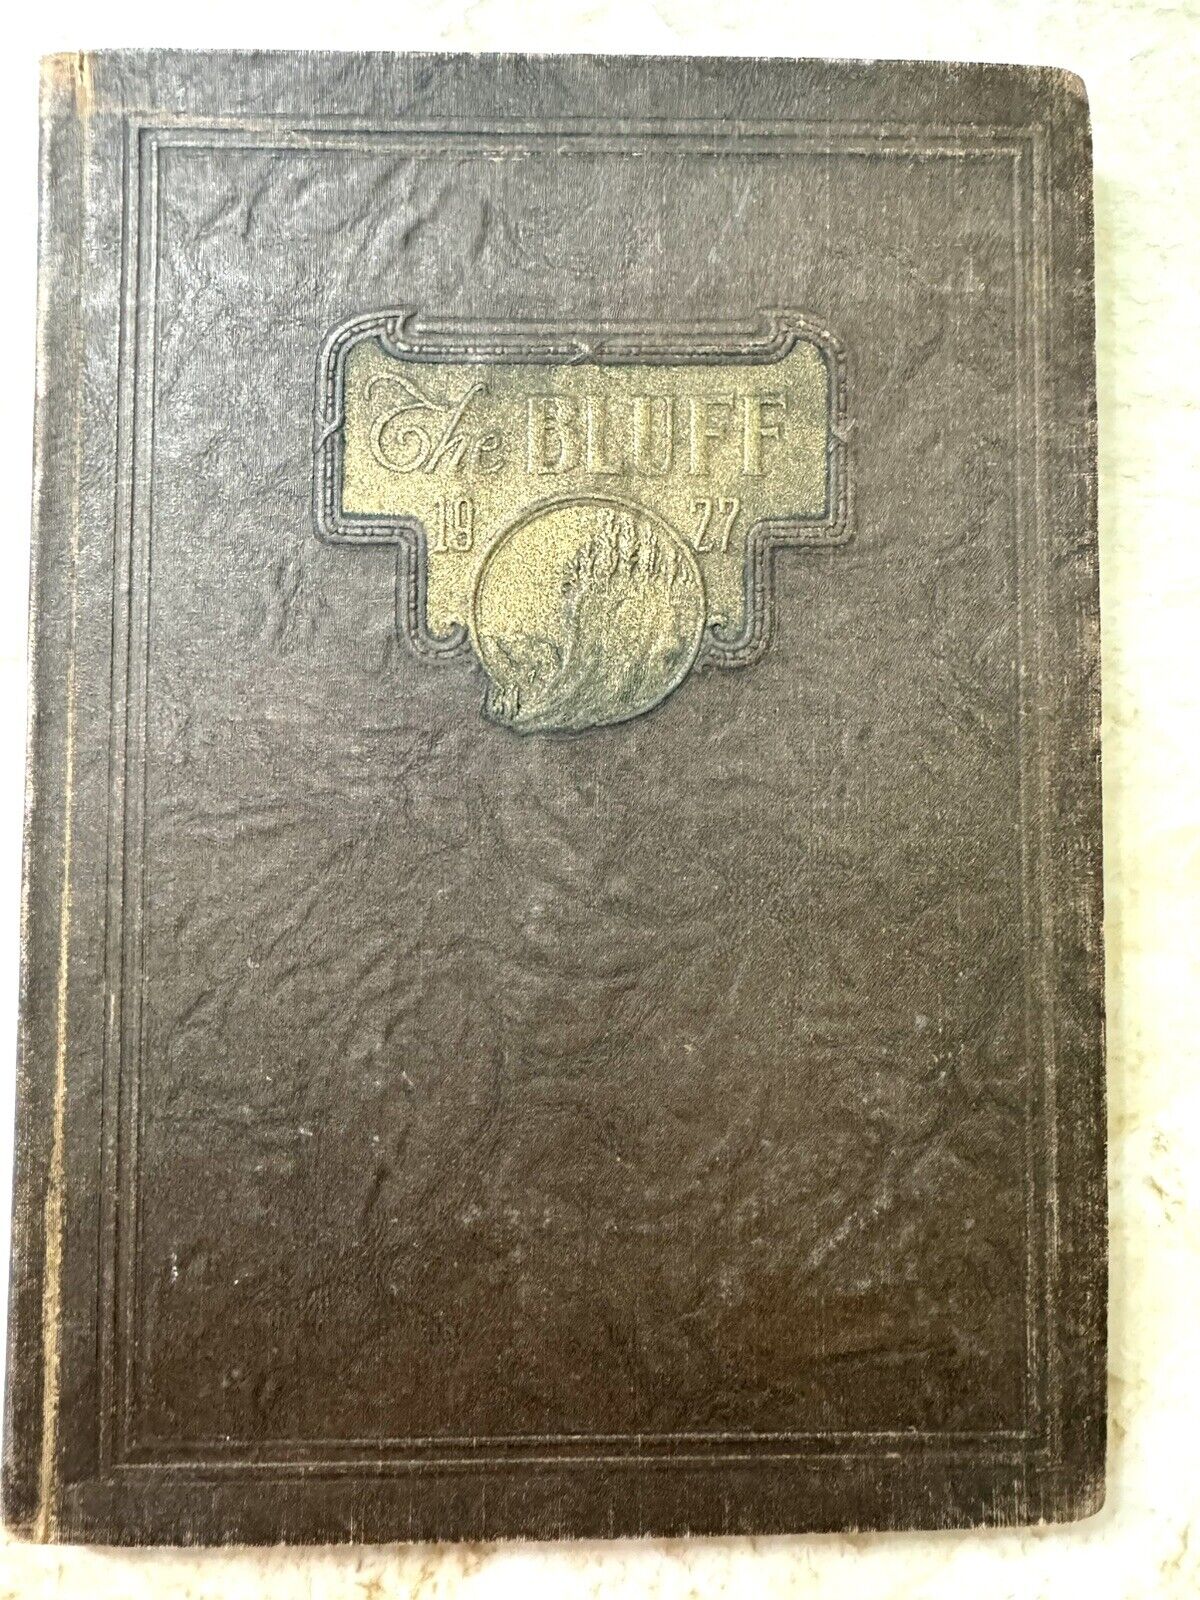 1927 The Bluff Of Popular Bluff High School  Missouri Yearbook with Autographs